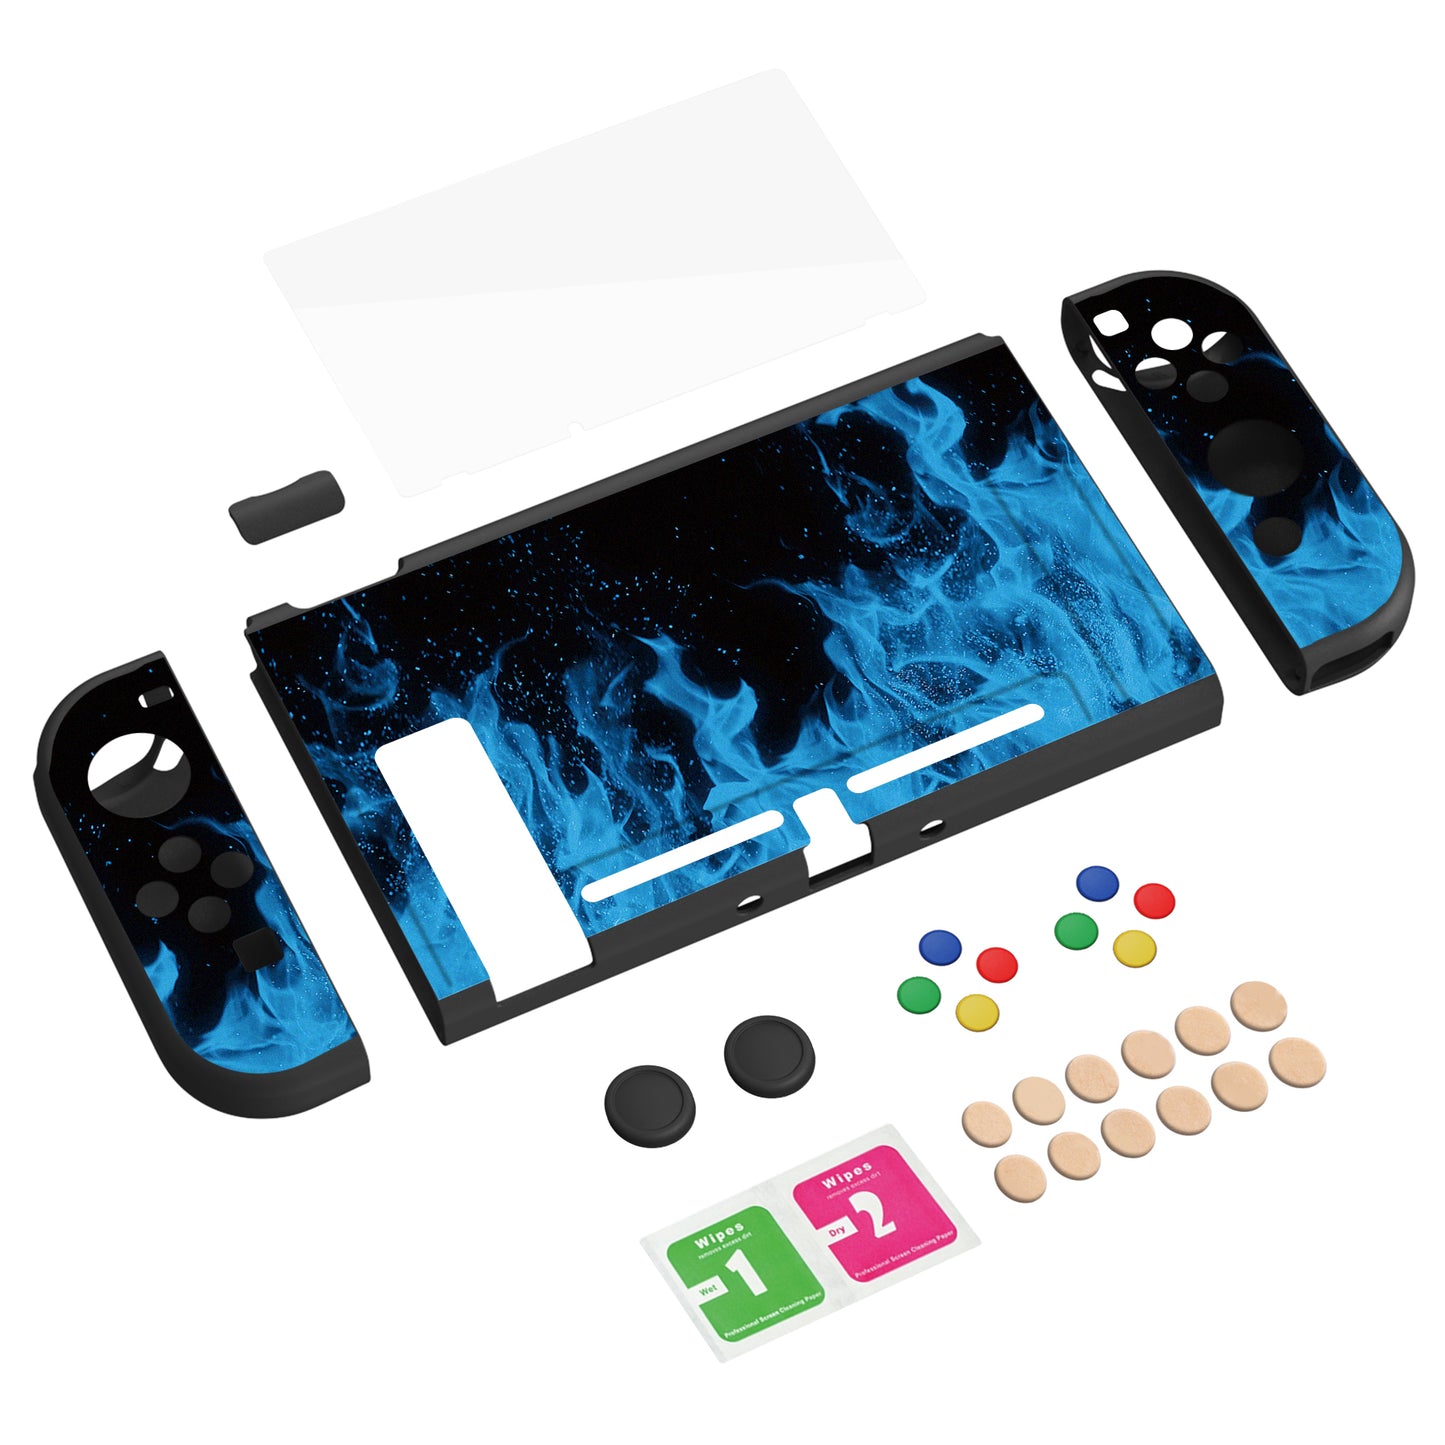 PlayVital ZealProtect Soft TPU Slim Protective Case with Tempered Glass Screen Protector & Thumb Grips & ABXY Direction Button Caps for NS Switch - Blue Flame - RNSYV6003 playvital